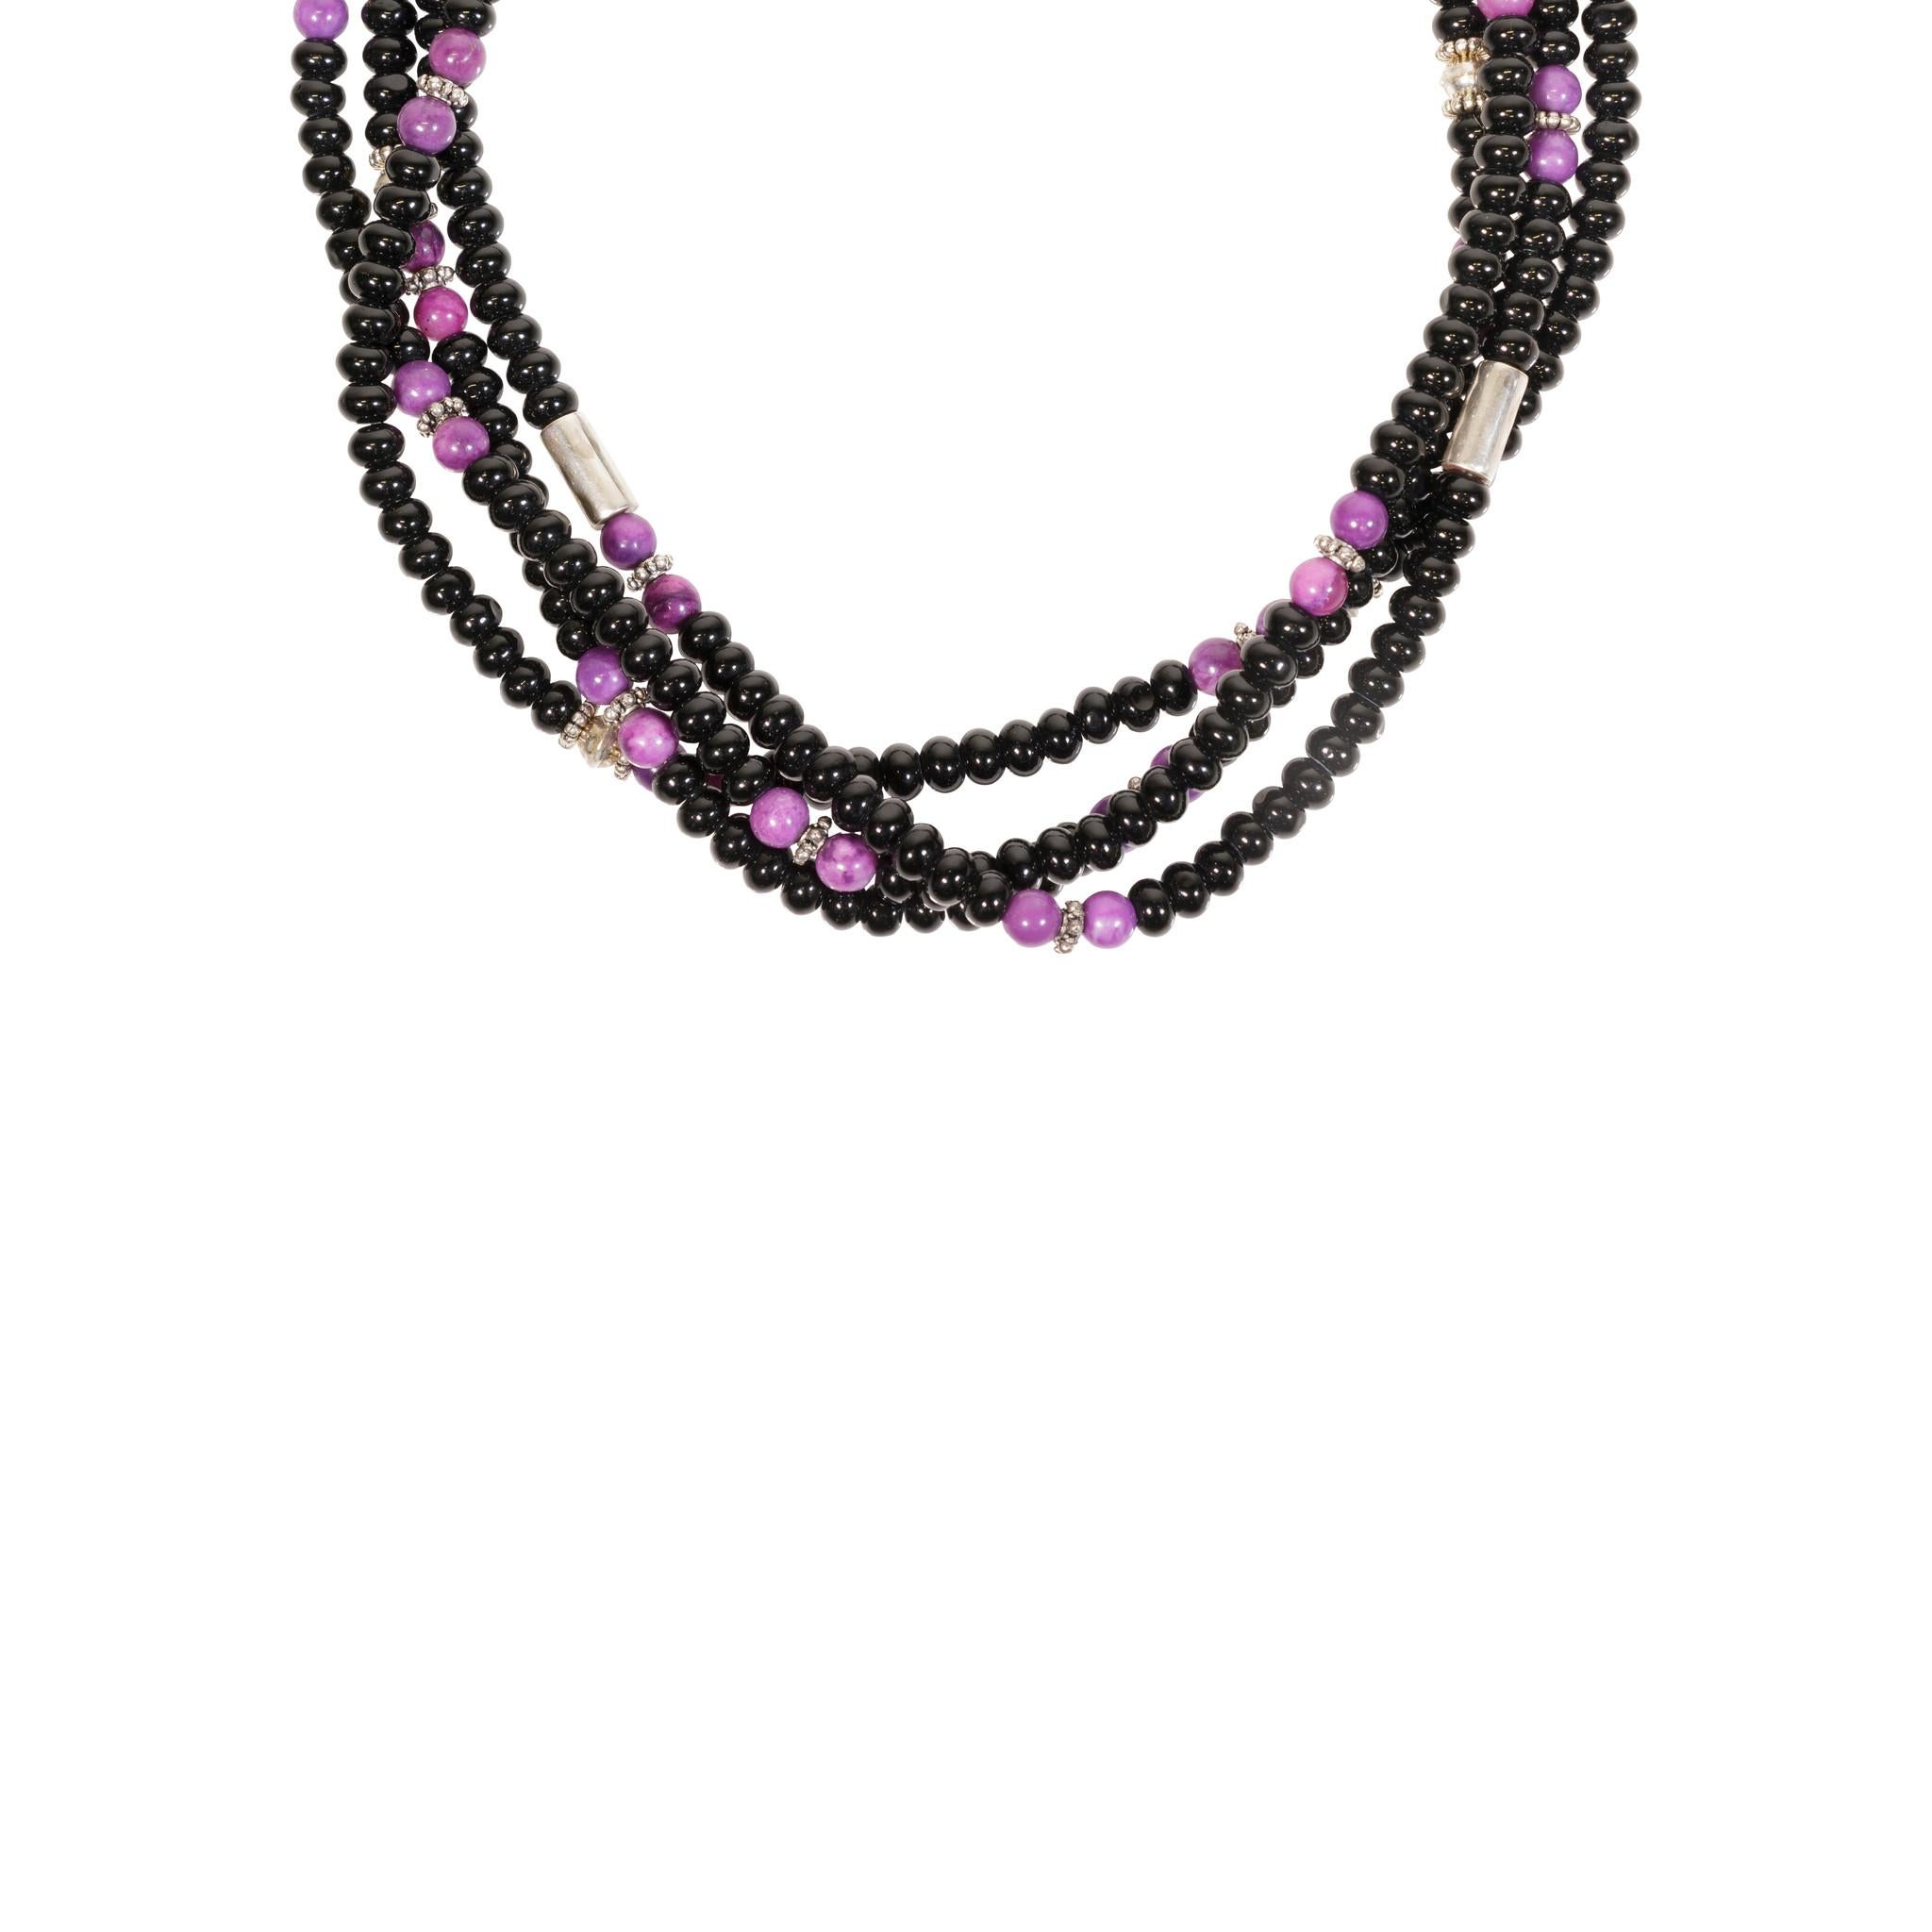 Tommy Singer navajo onyx and sugilite necklace with four strands. Silver accents with 14kt gold overlay.

PERIOD: After 1950

ORIGIN: Navajo, Southwest

SIZE: 29